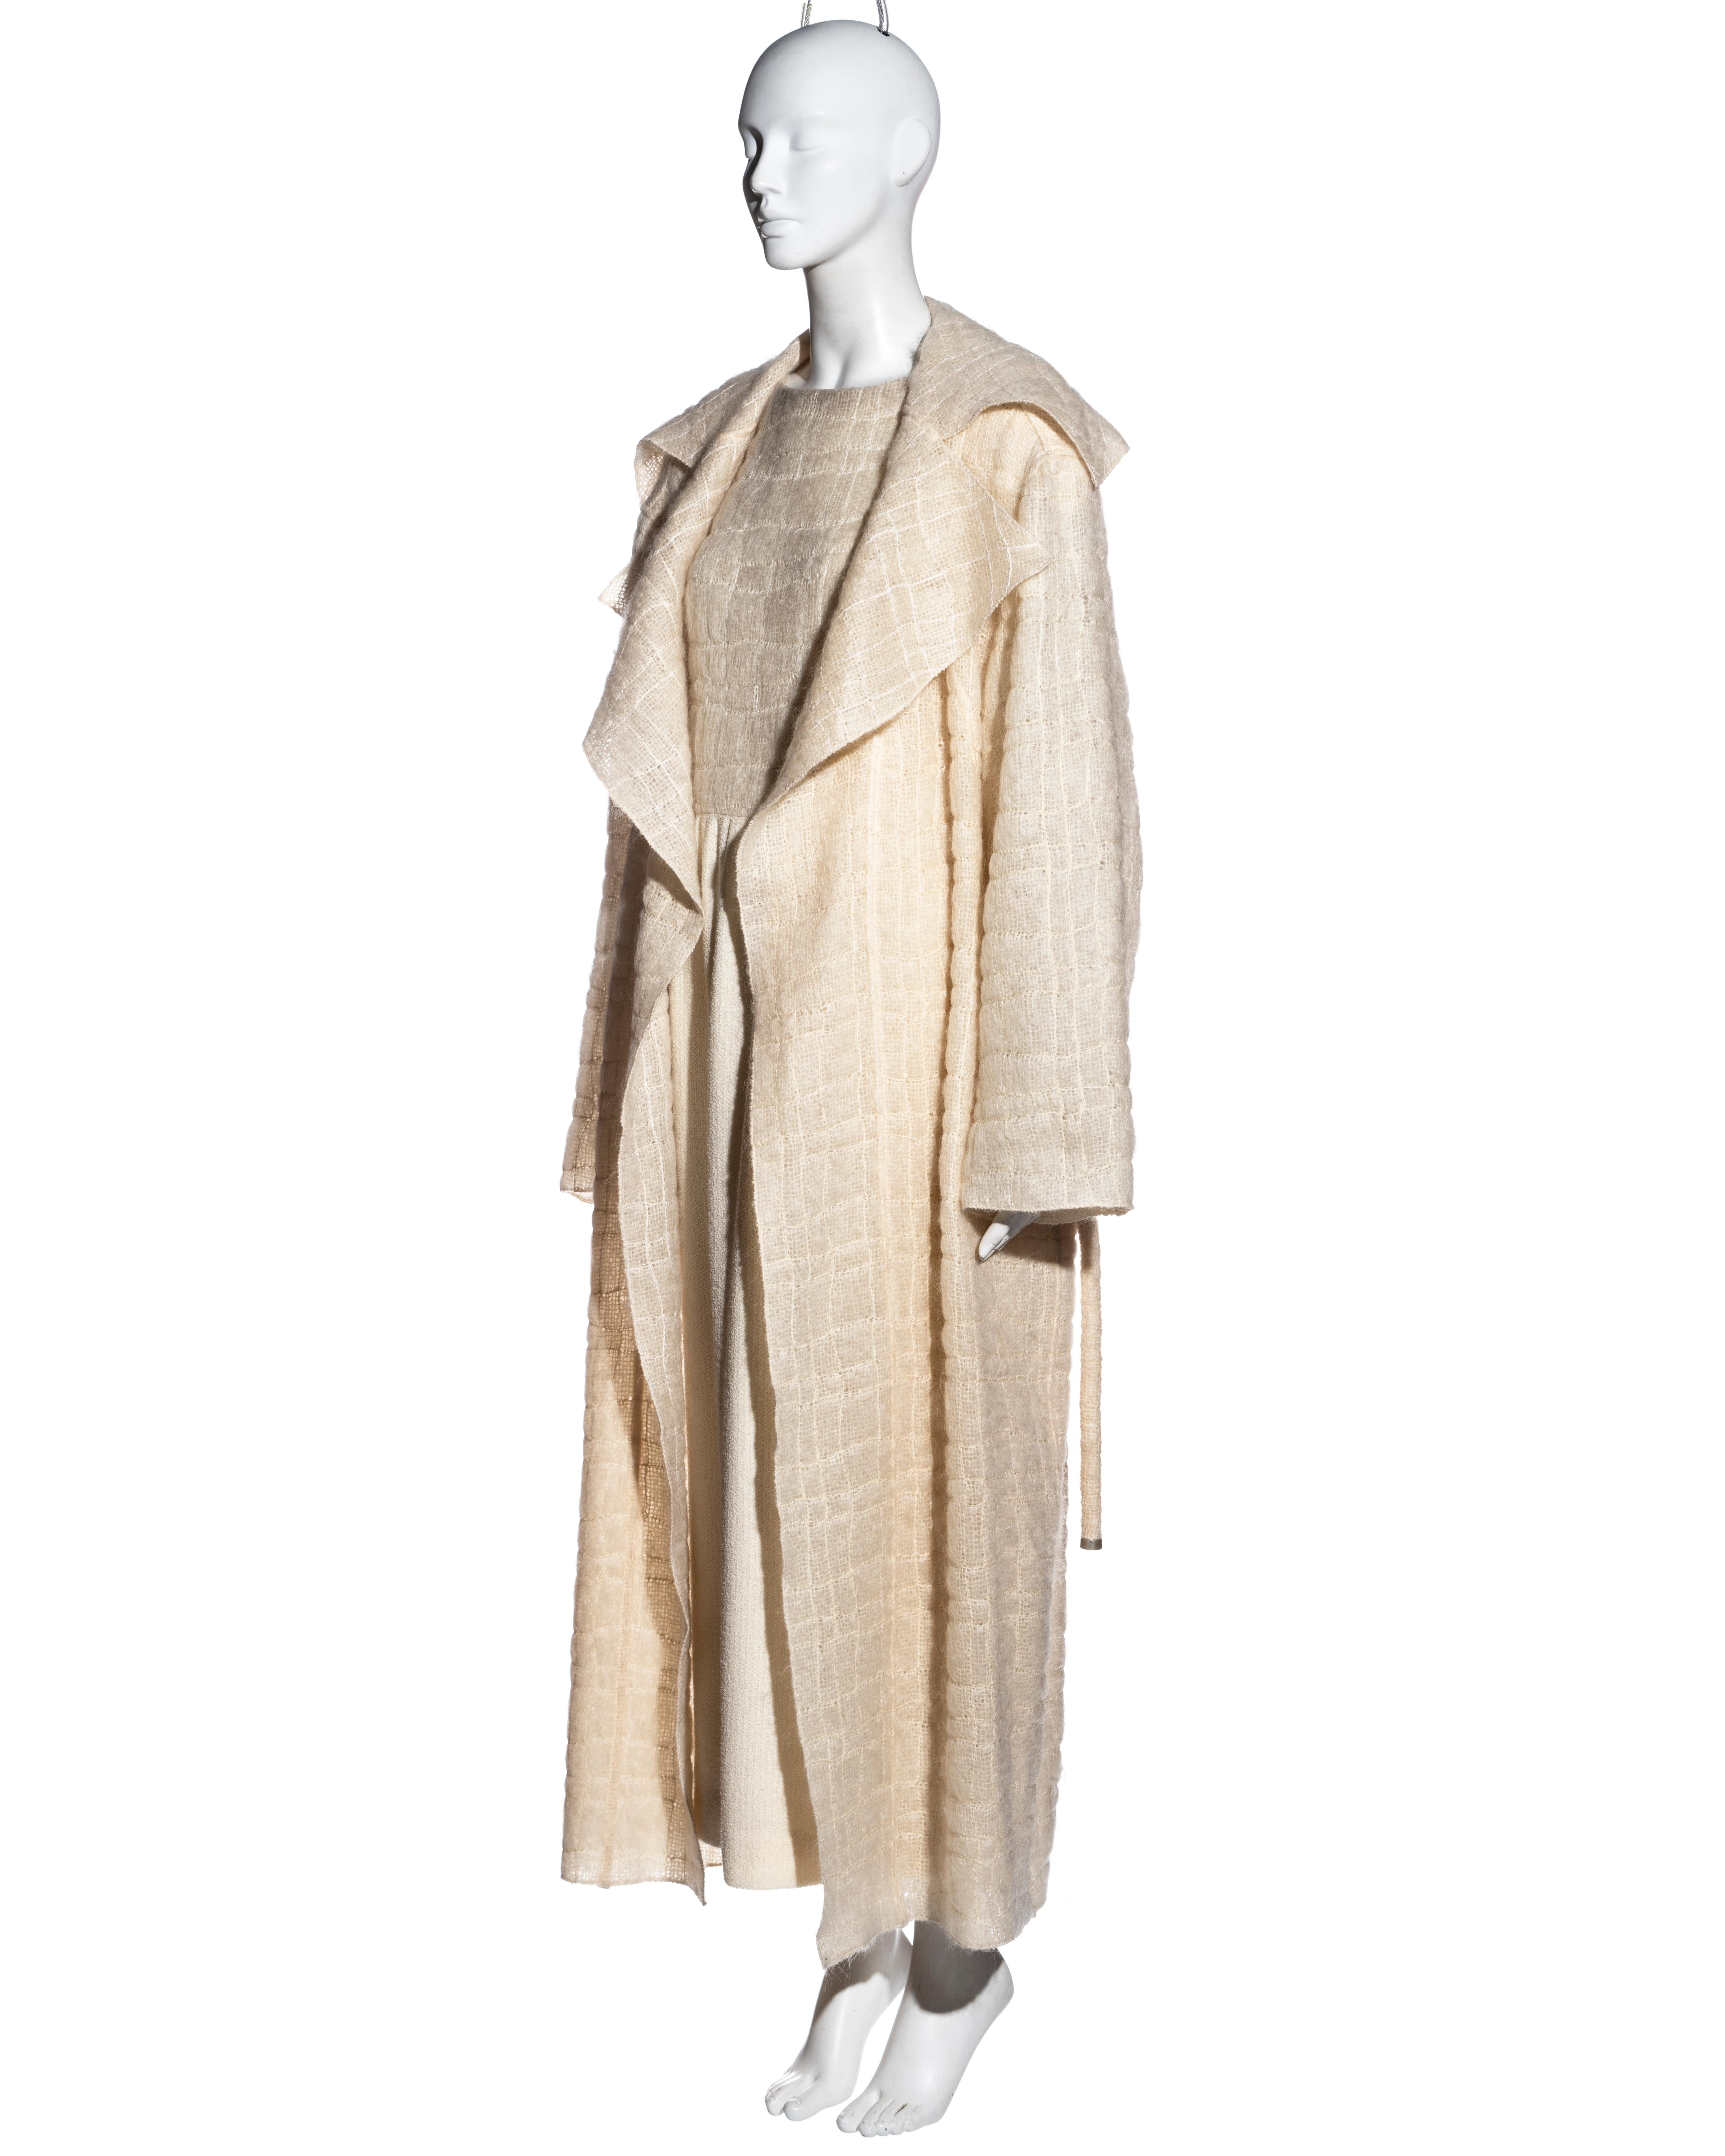 Beige Chanel by Karl Lagerfeld cream mohair wool coat and dress ensemble, fw 1998 For Sale